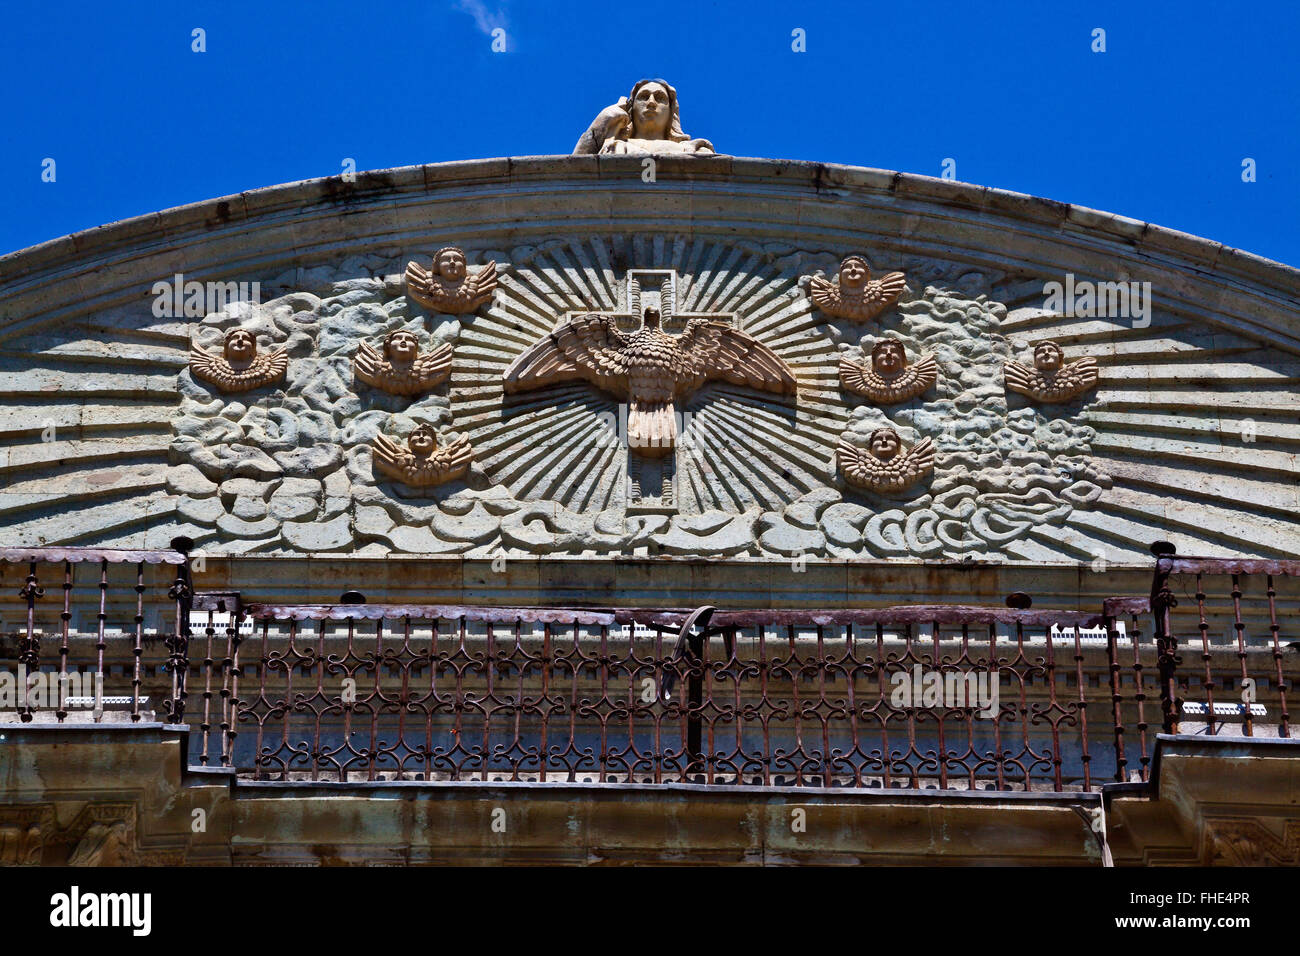 Top of the CATHEDRAL OF OUR LADY OF ASSUMPTION was constructed in 1535 and is located in the ZOCALO - OAXACA, MEXICO Stock Photo